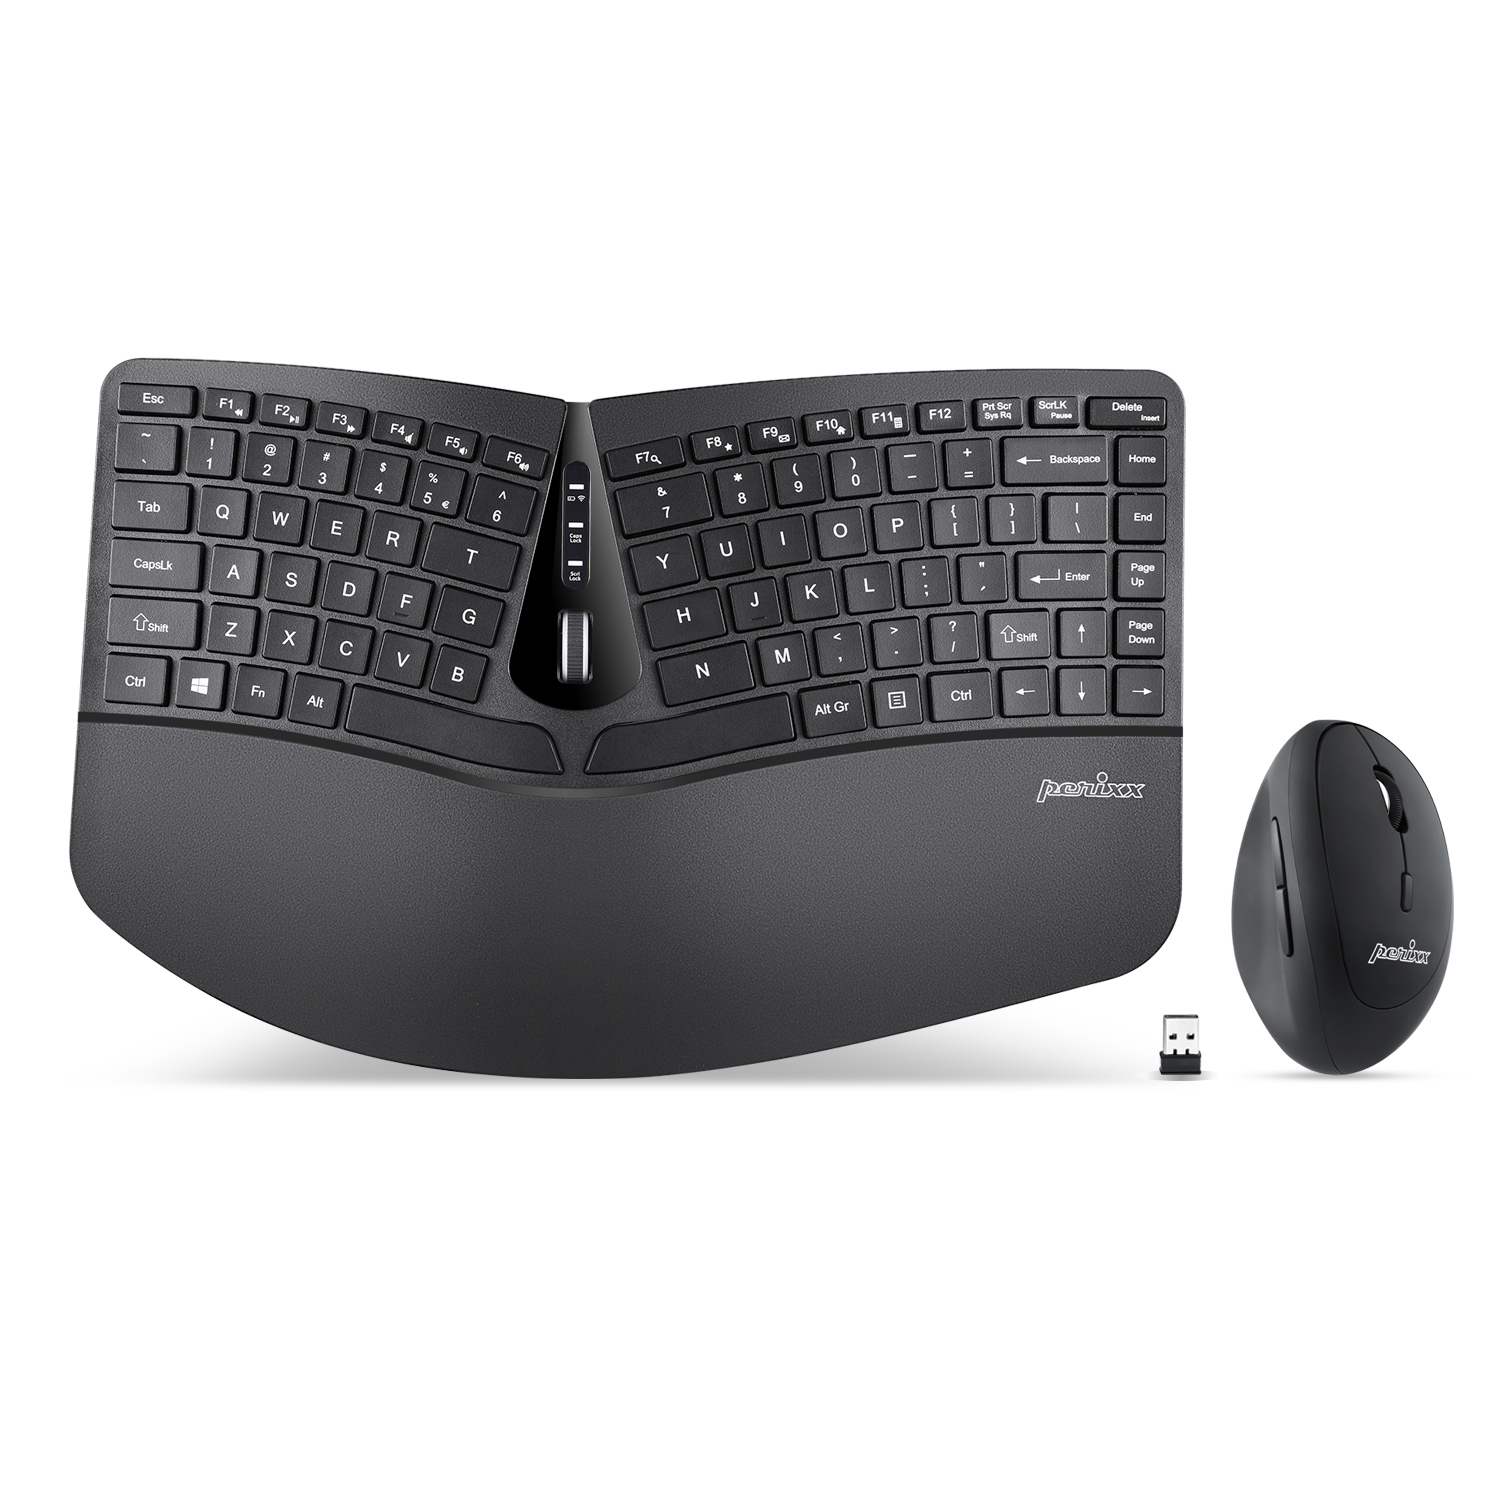  PERIDUO-606 - Wireless and Compact Keyboard and Mouse Set 